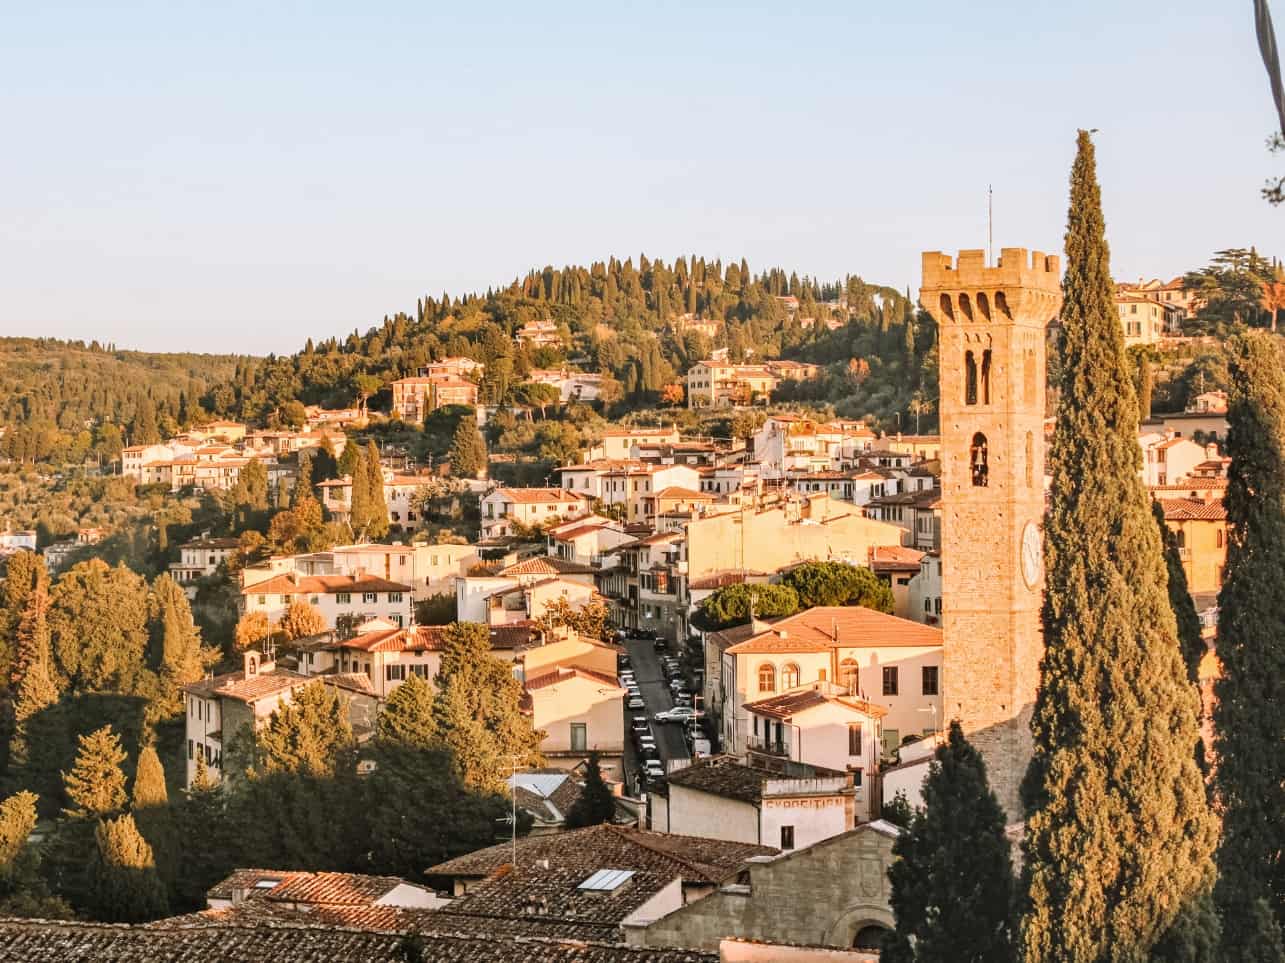 Sunset views of Fiesole outside of Florence